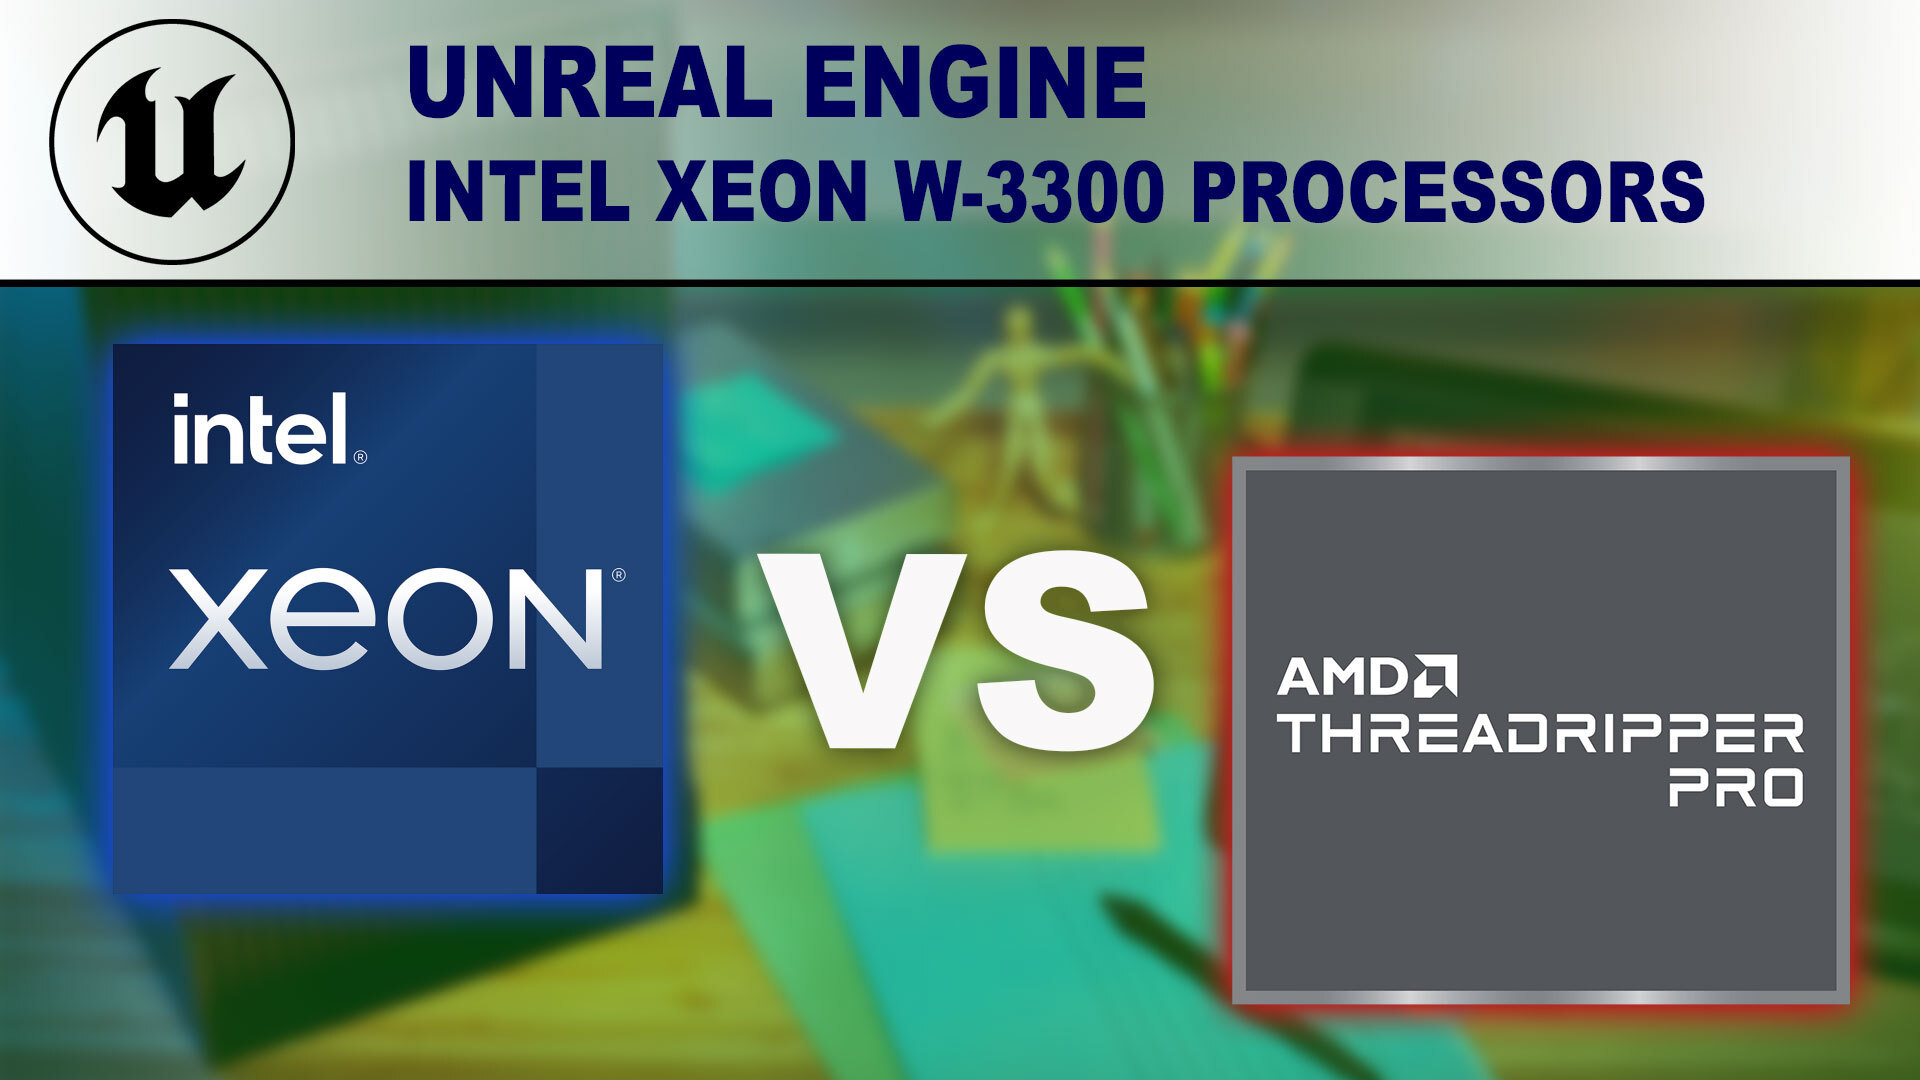 Intel Xeon W-3300 Processors for Unreal Engine